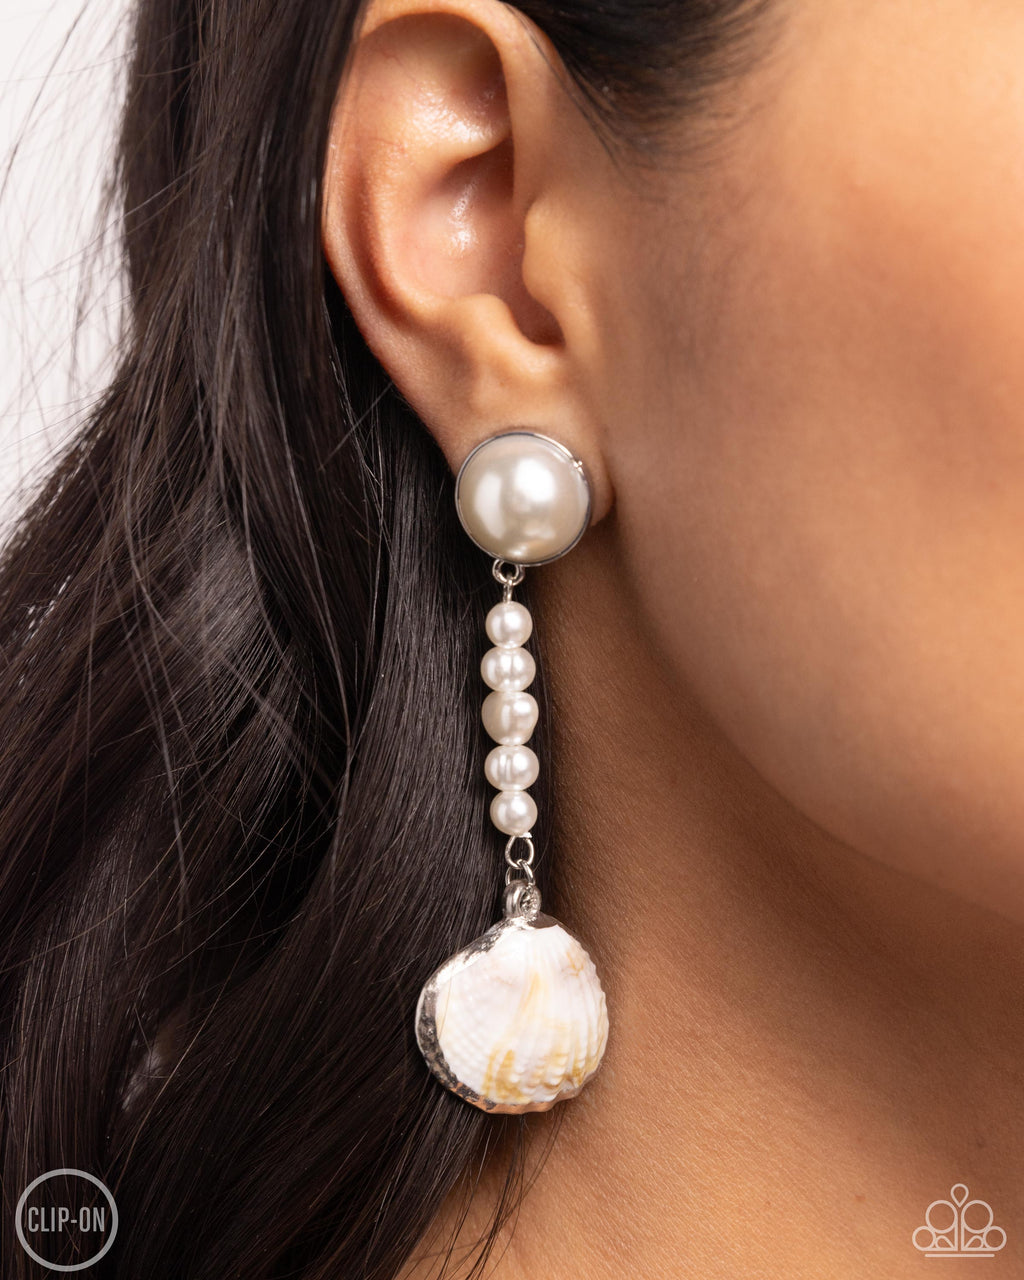 Paparazzi - Oceanic Occasion - White Earrings